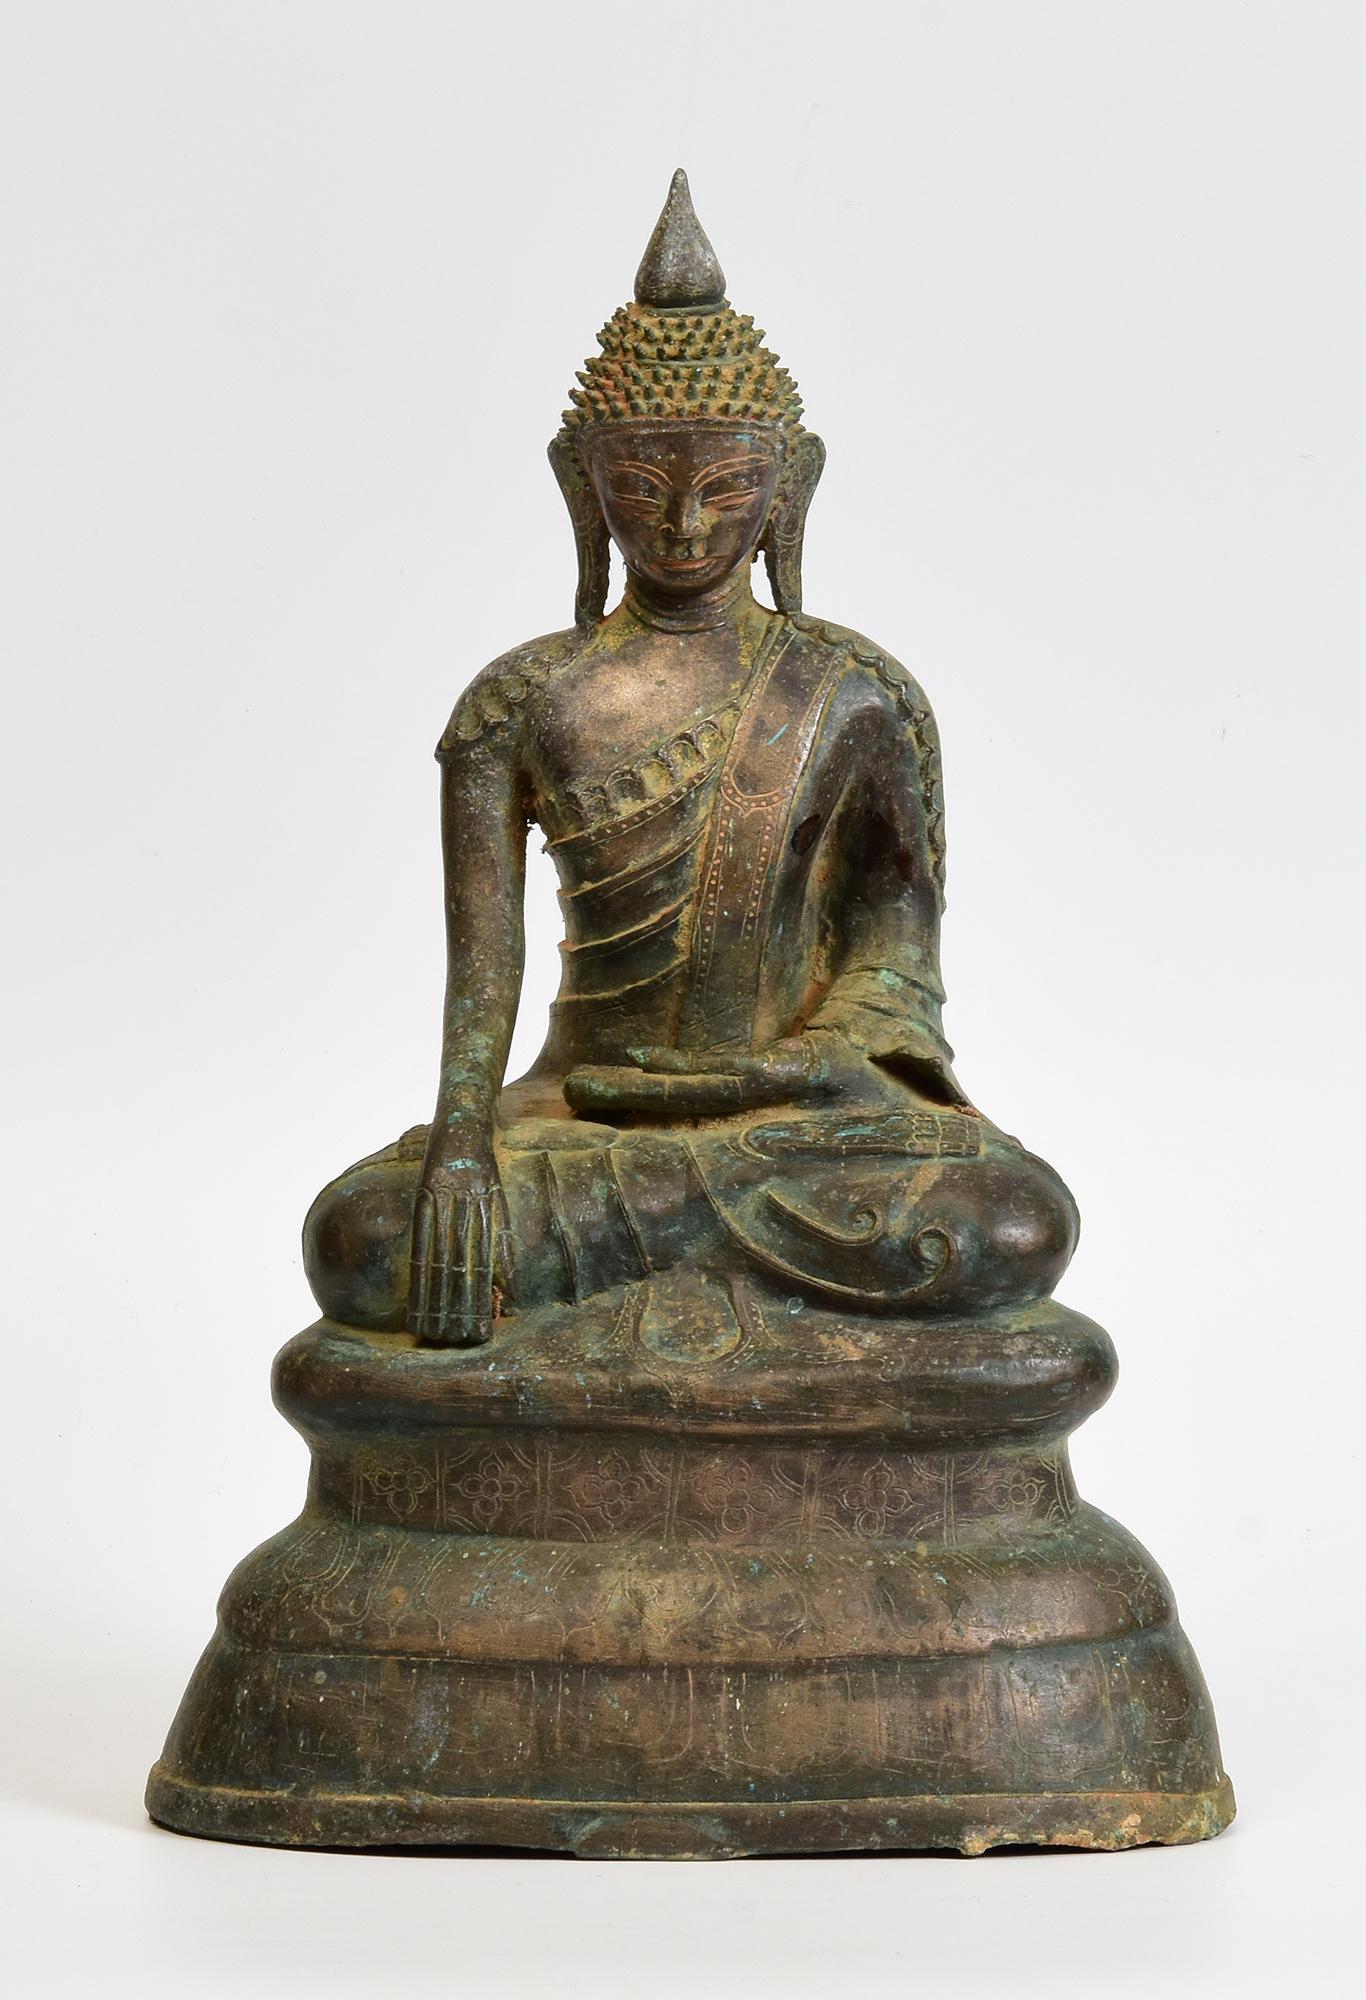 17th Century, Early Shan, Rare Antique Burmese Bronze Seated Buddha For Sale 7